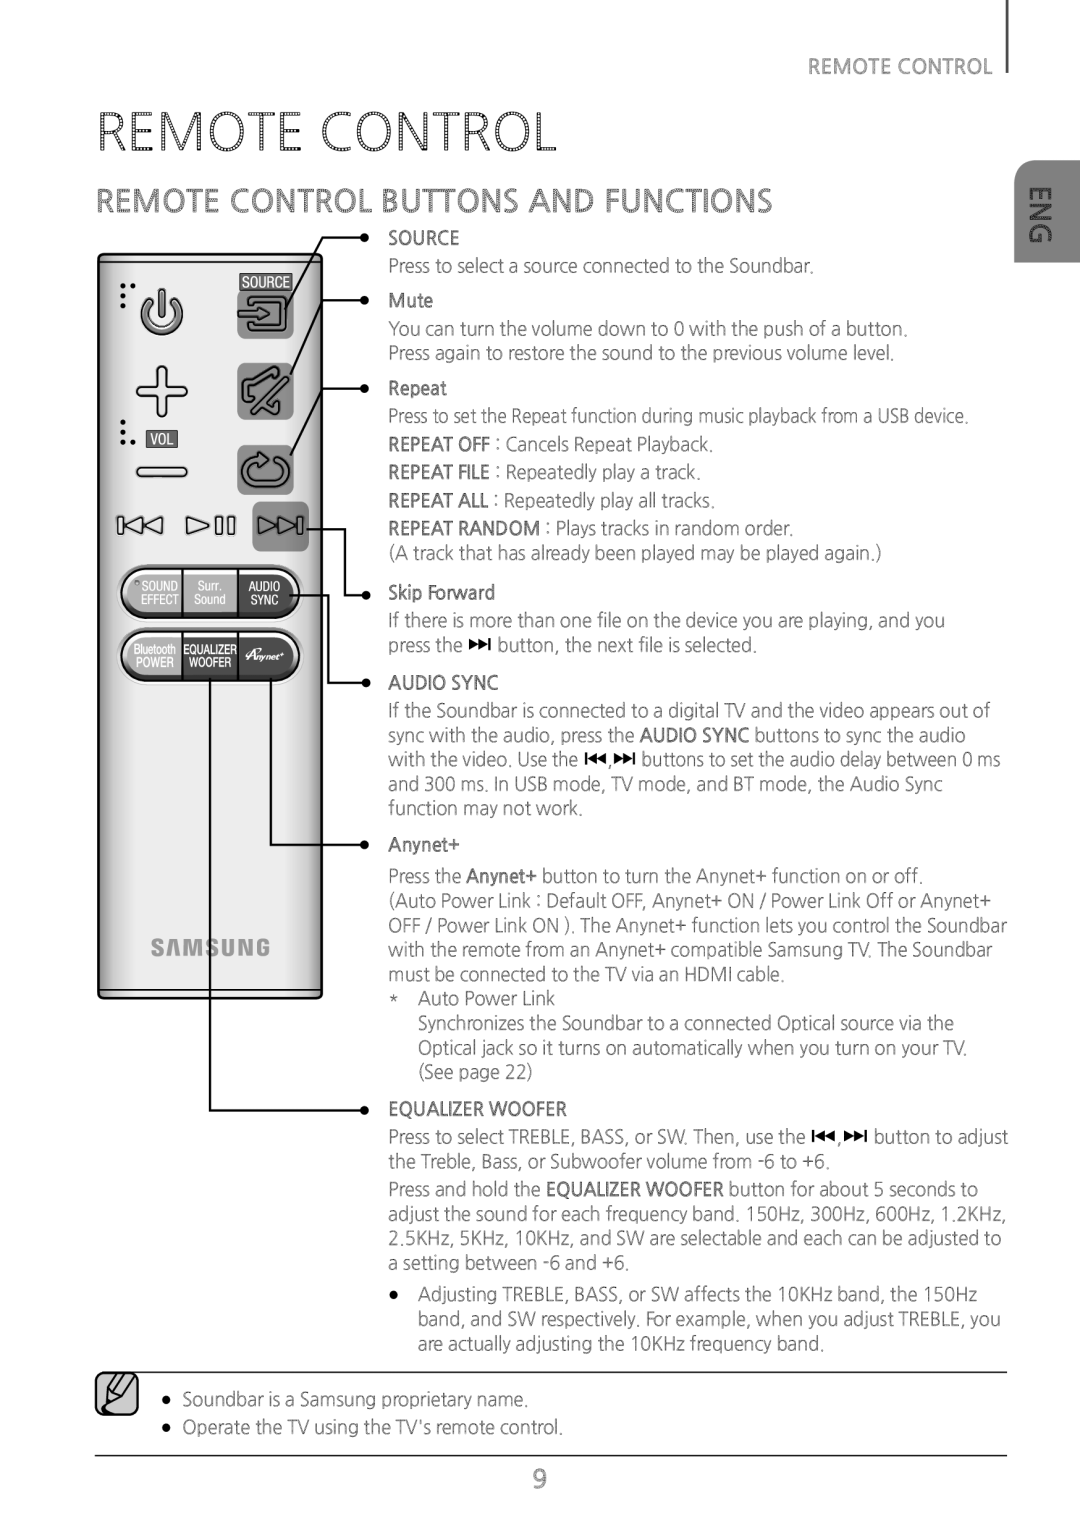 Samsung HWH7500 Remote Control Buttons and Functions, Source, Mute, Repeat, Skip Forward, Audio Sync, Anynet+ 